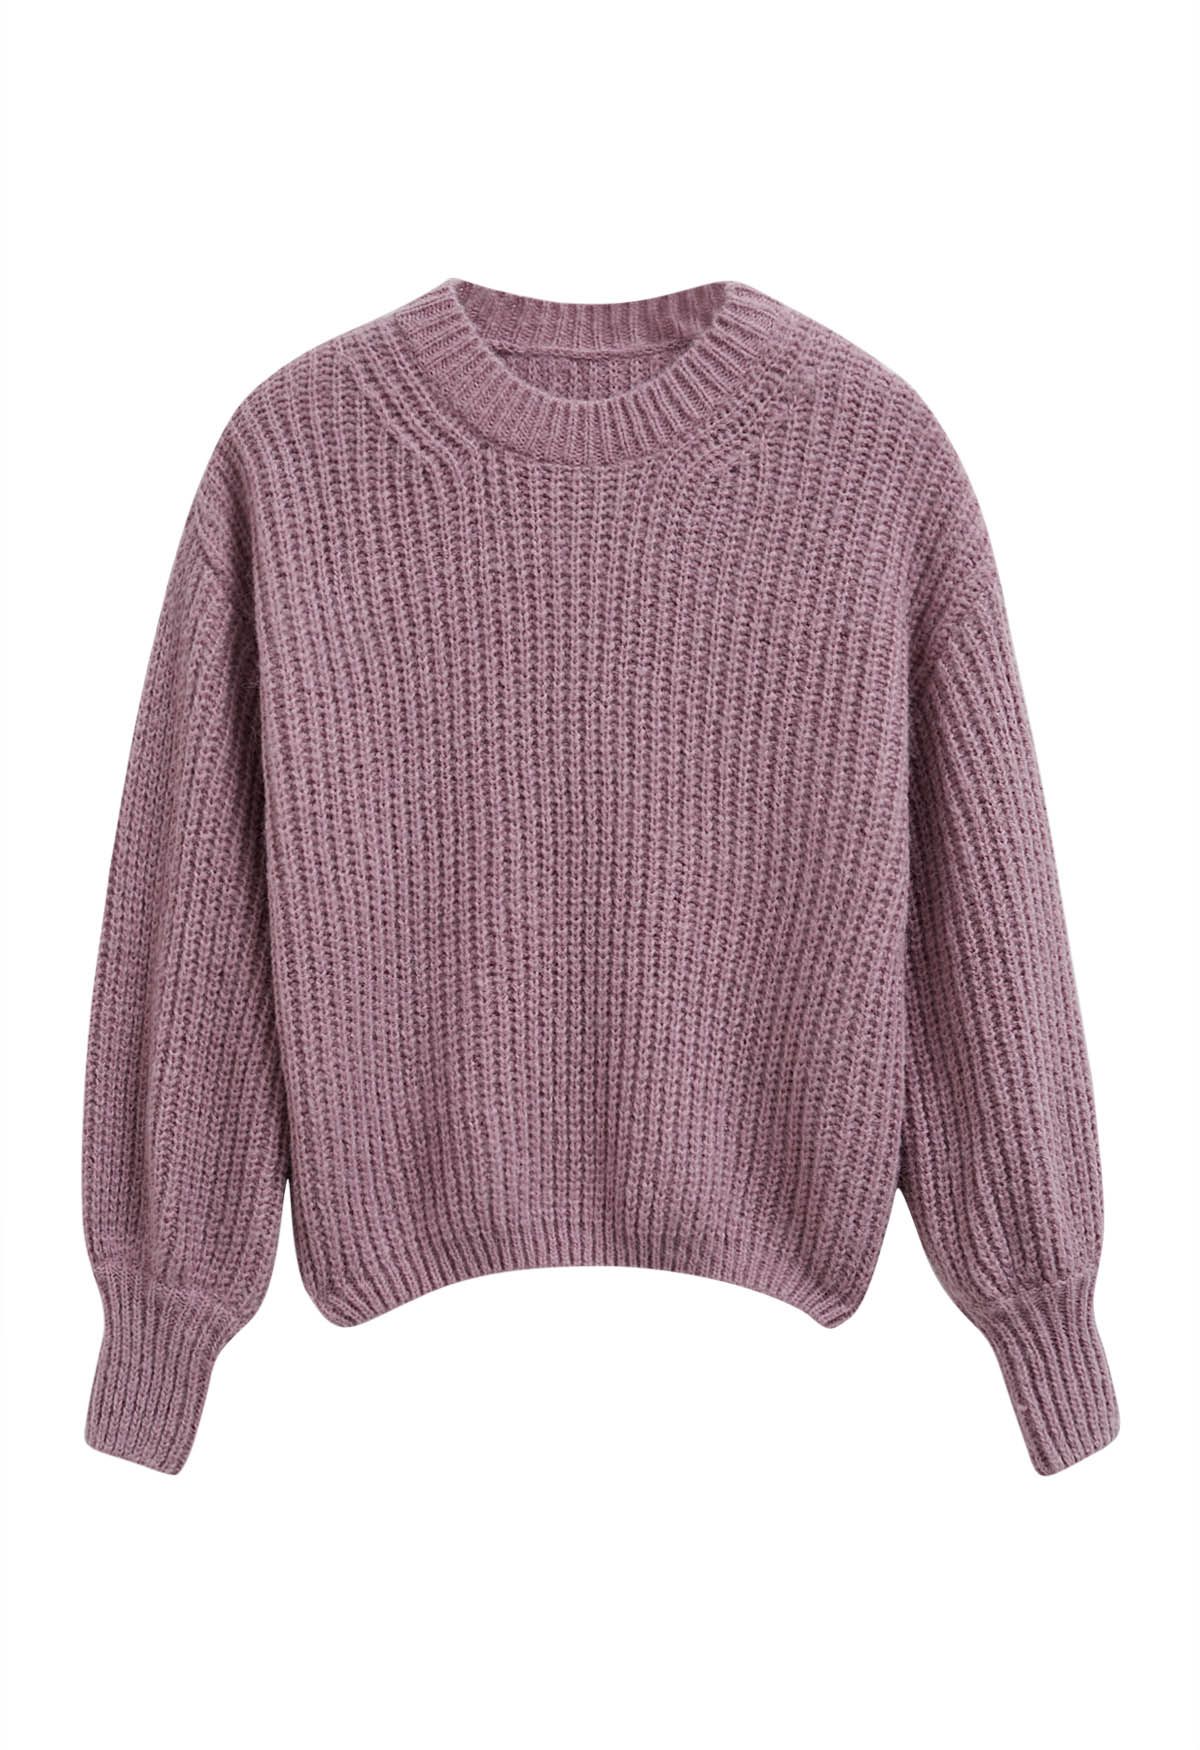 Solid Color Rib Knit Sweater in Lilac